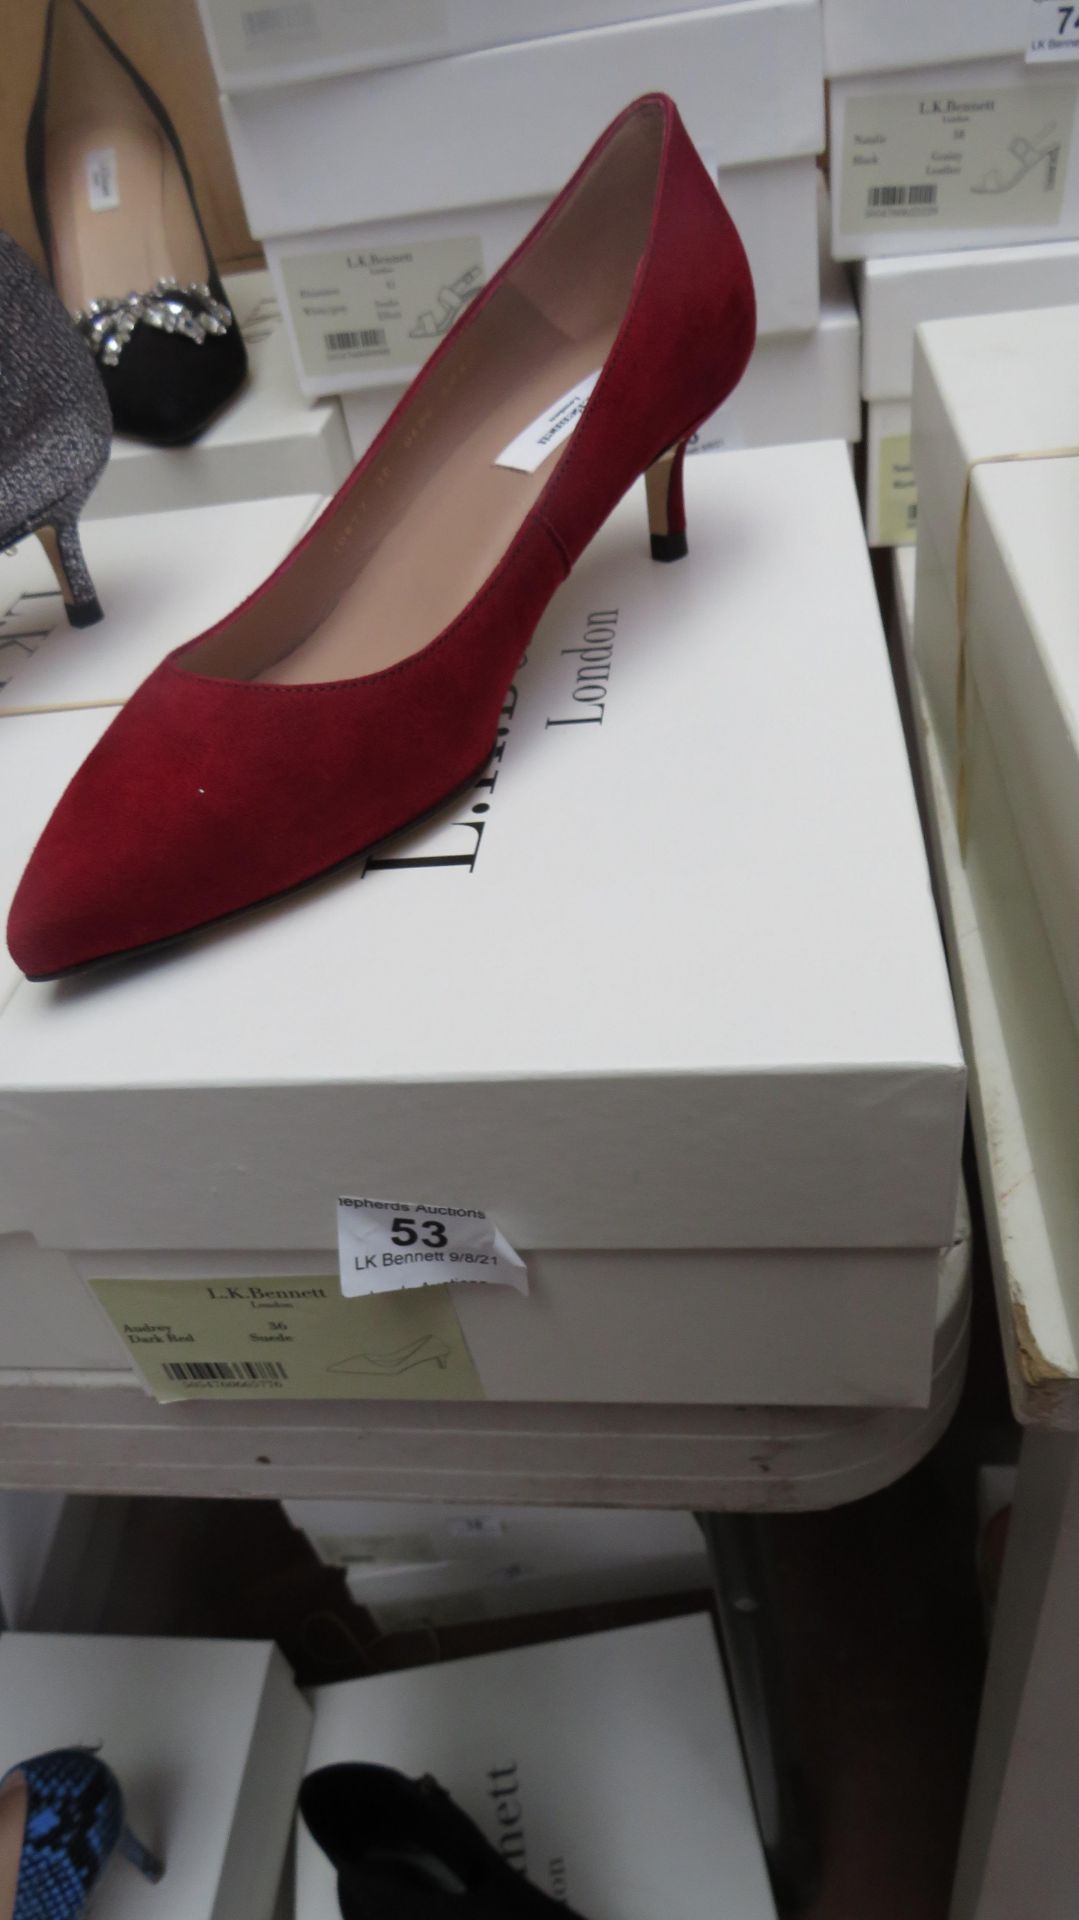 L K Bennett London Audrey Dark Red Suede Shoes size 36 RRP £195 new & boxed see image for design